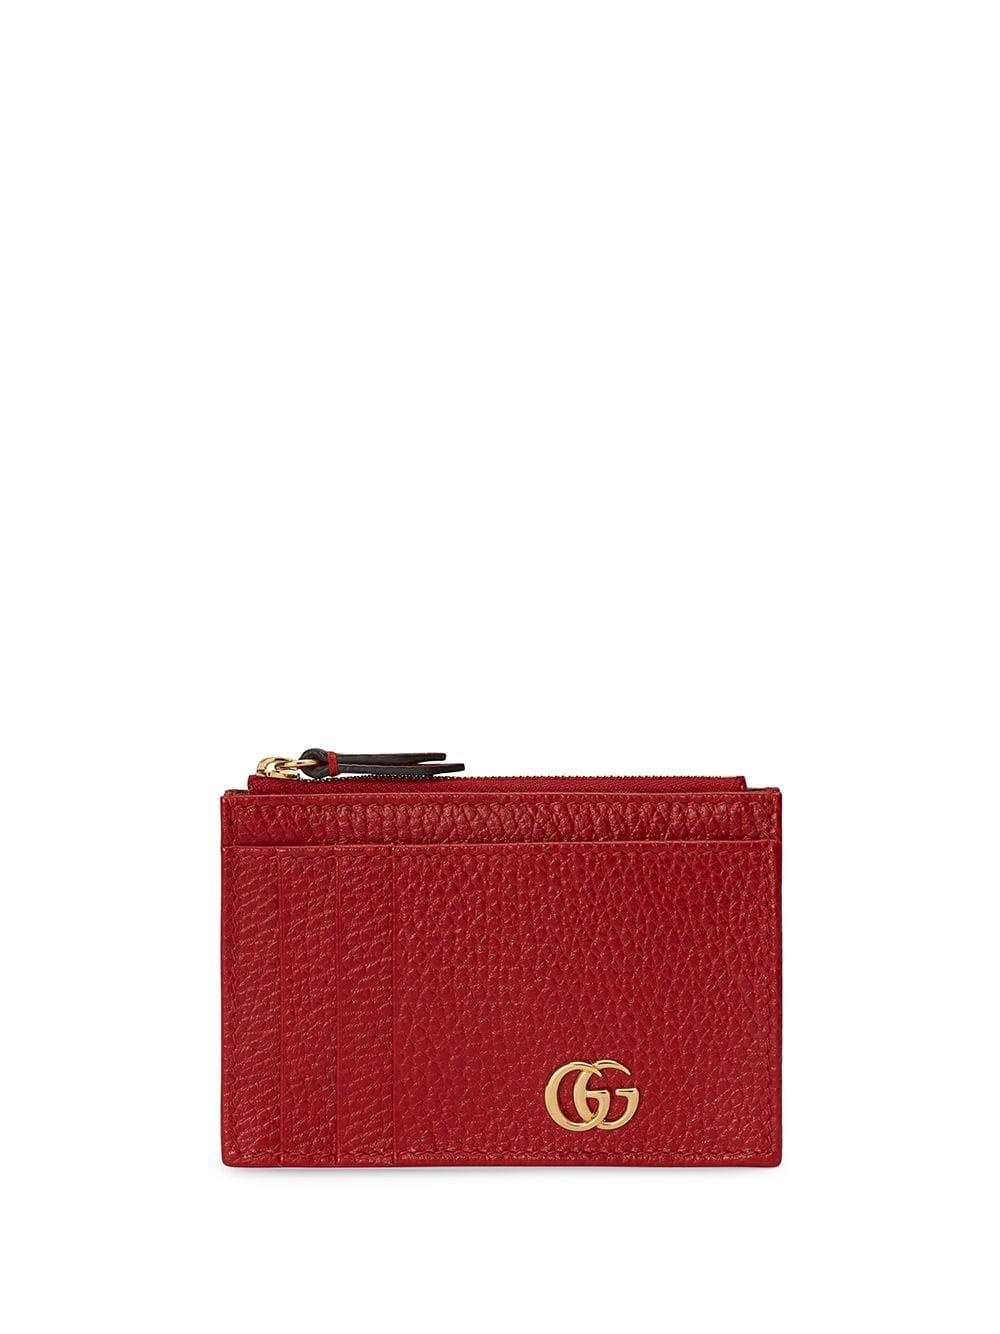 Isaac svømme licens Gucci GG Marmont Card Holder in Red - Lyst